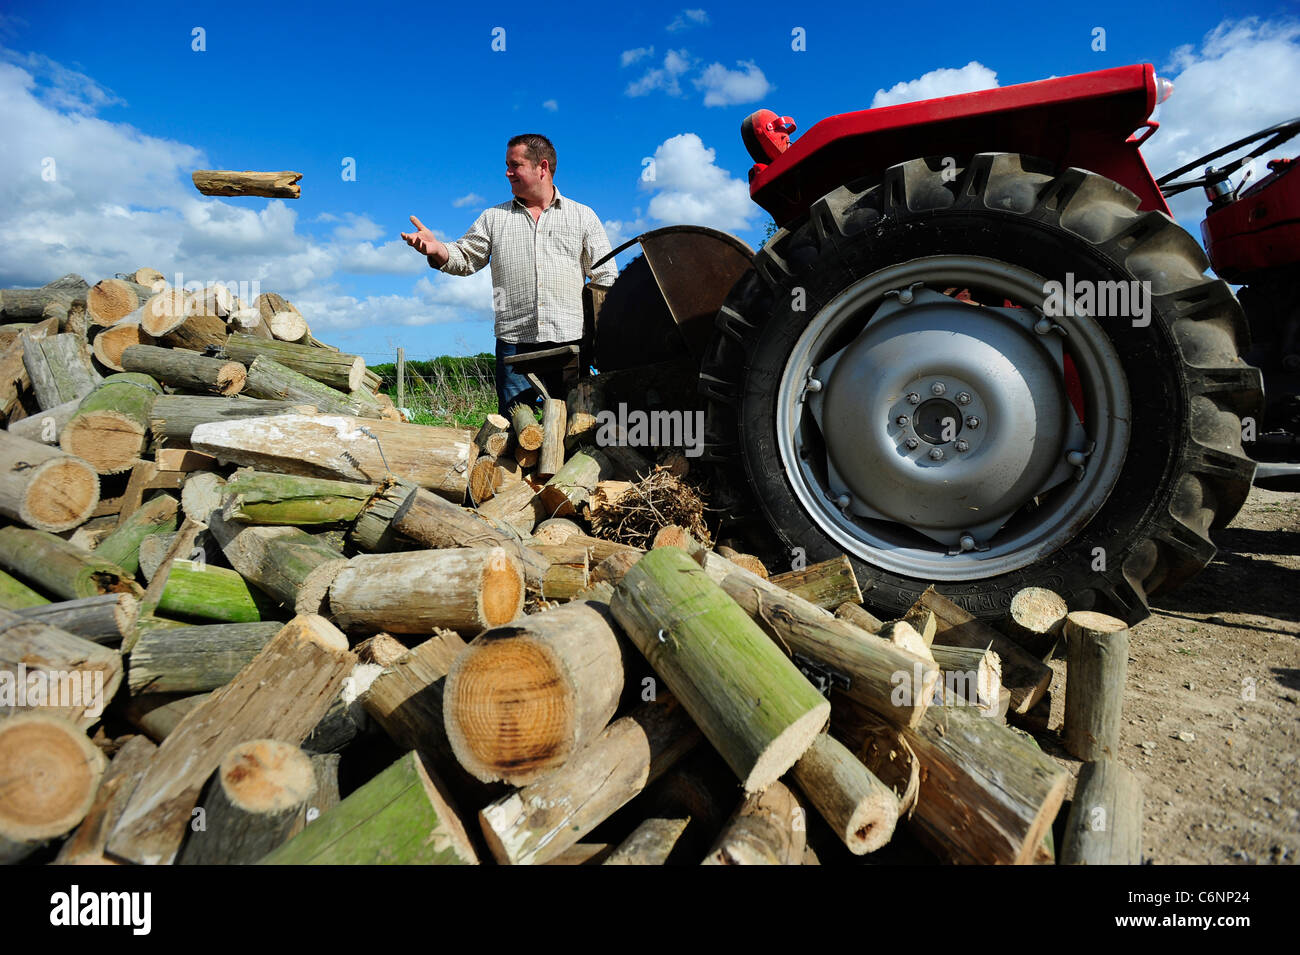 A young farmer pictured with his red Massey Ferguson tractor, Dorset, Uk Stock Photo